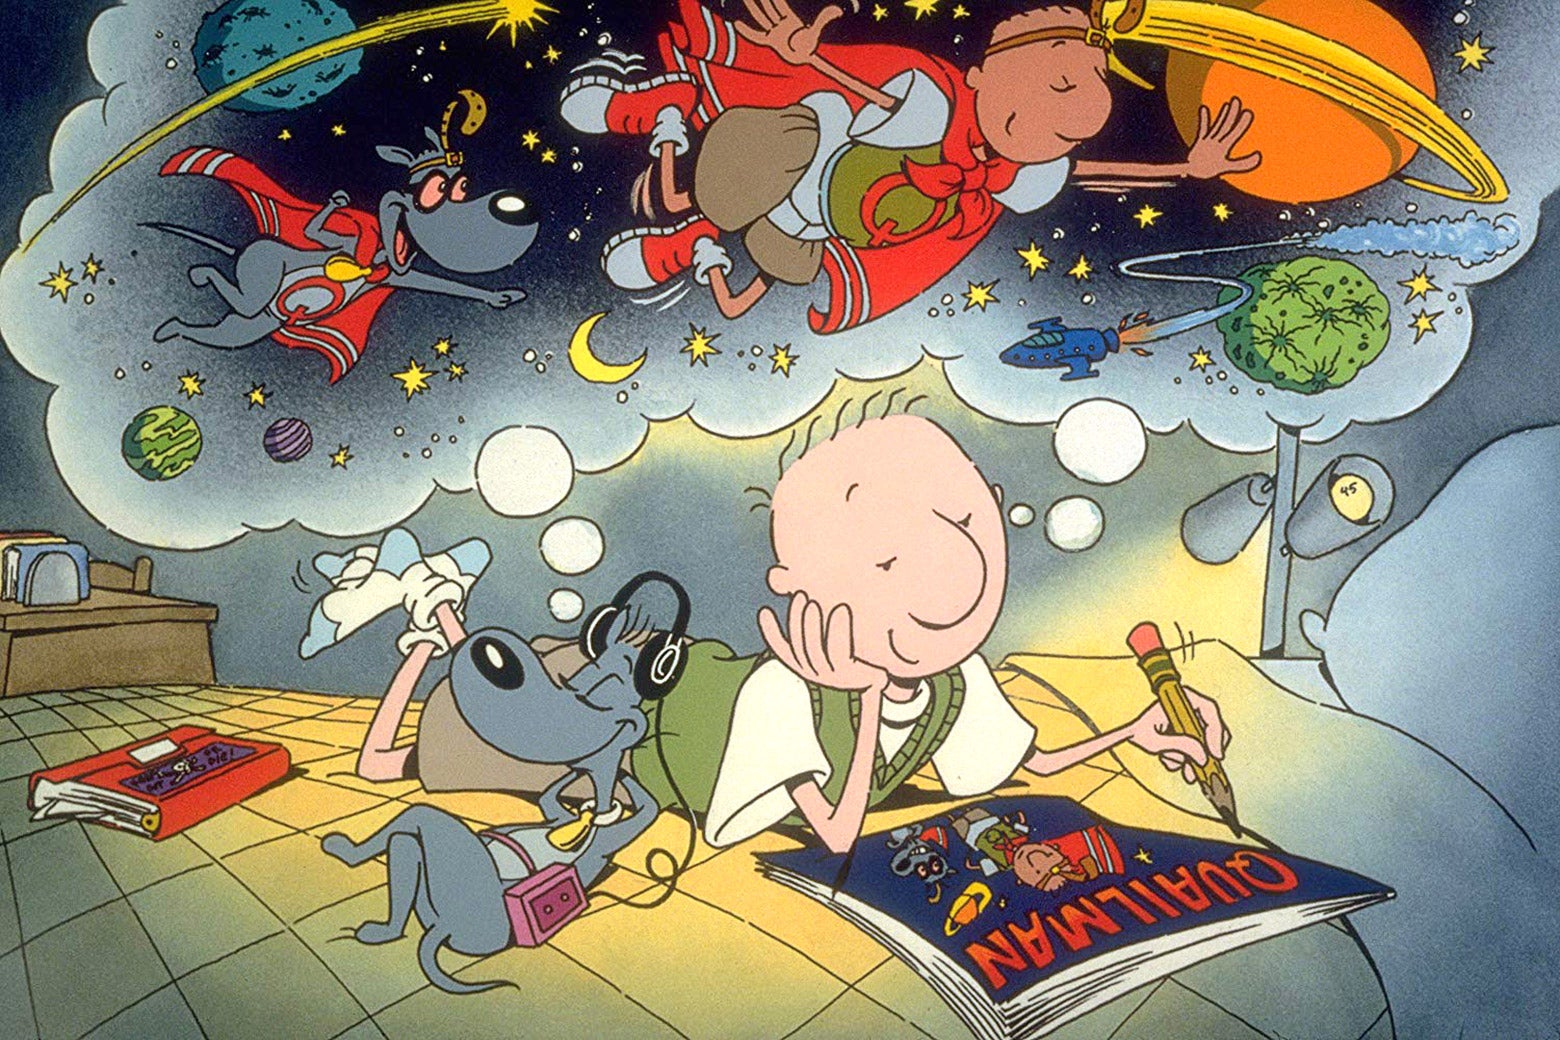 A still from Nickelodeon's Doug, featuring Doug and his dog.